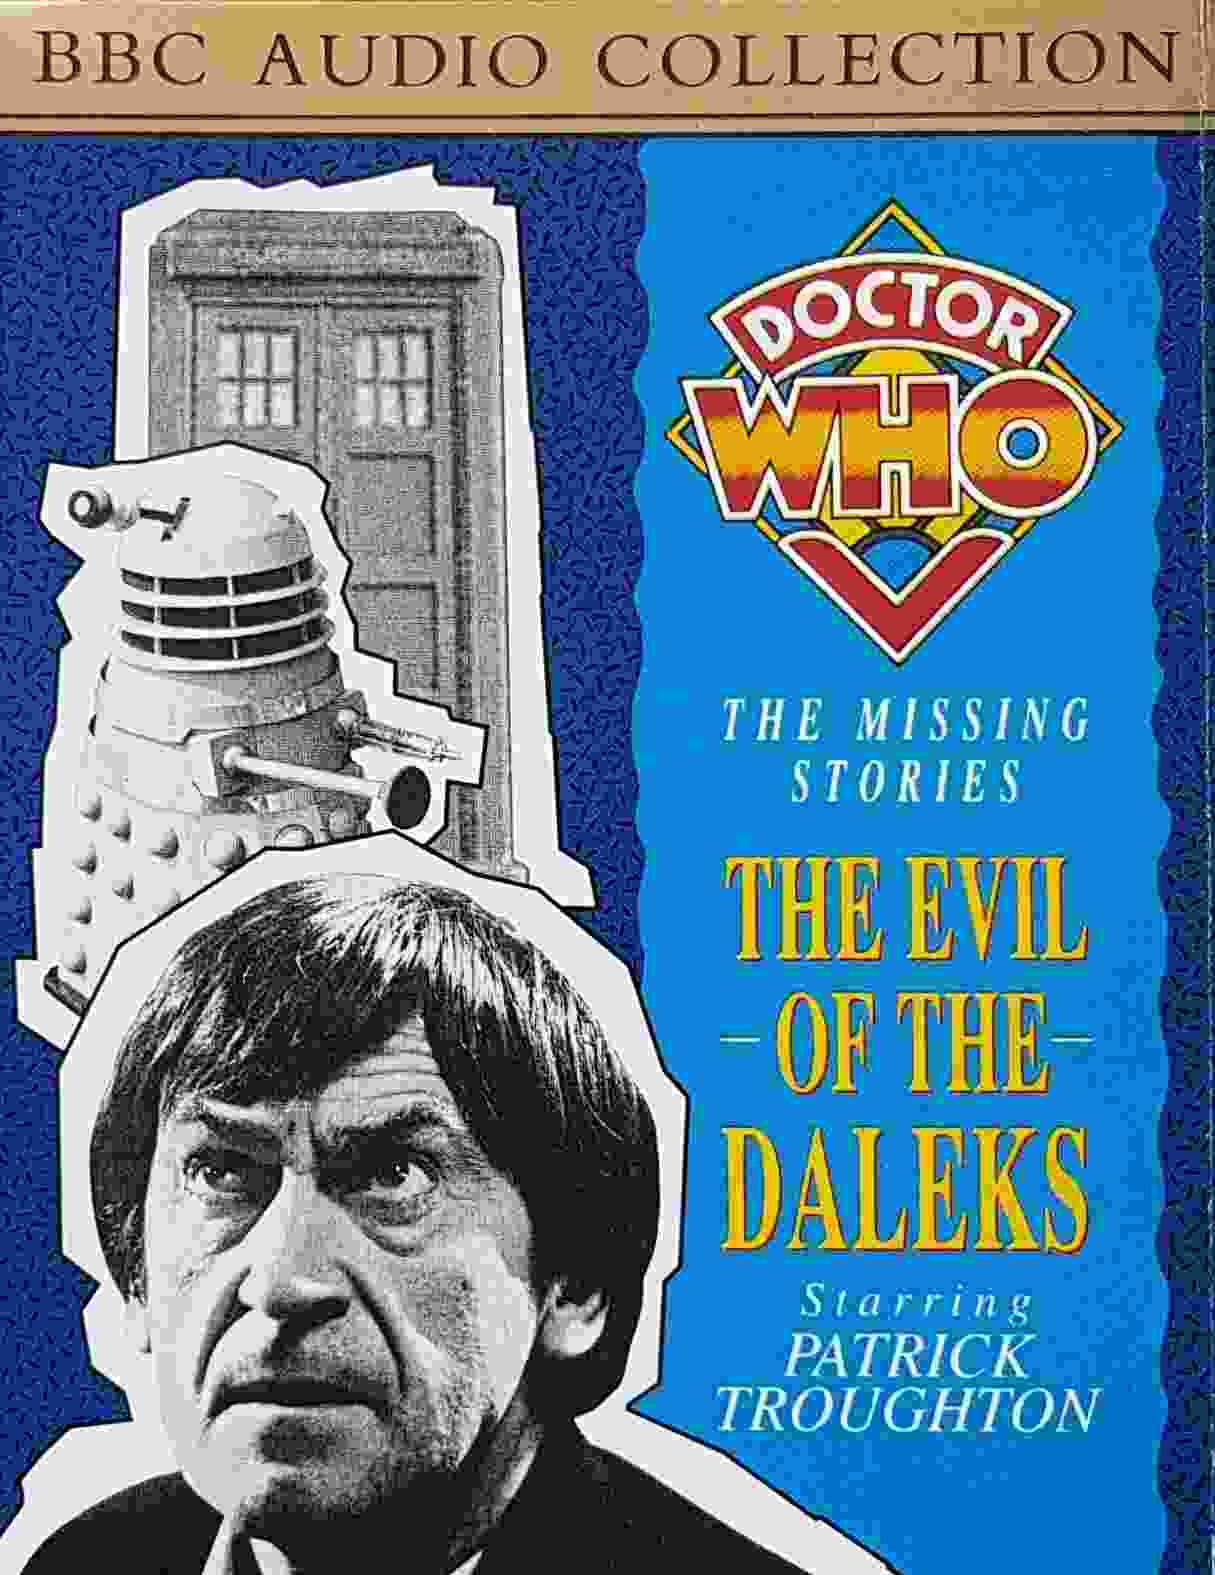 Picture of ZBBC 1303 Doctor Who - The evil of the Daleks by artist David Whitaker from the BBC cassettes - Records and Tapes library